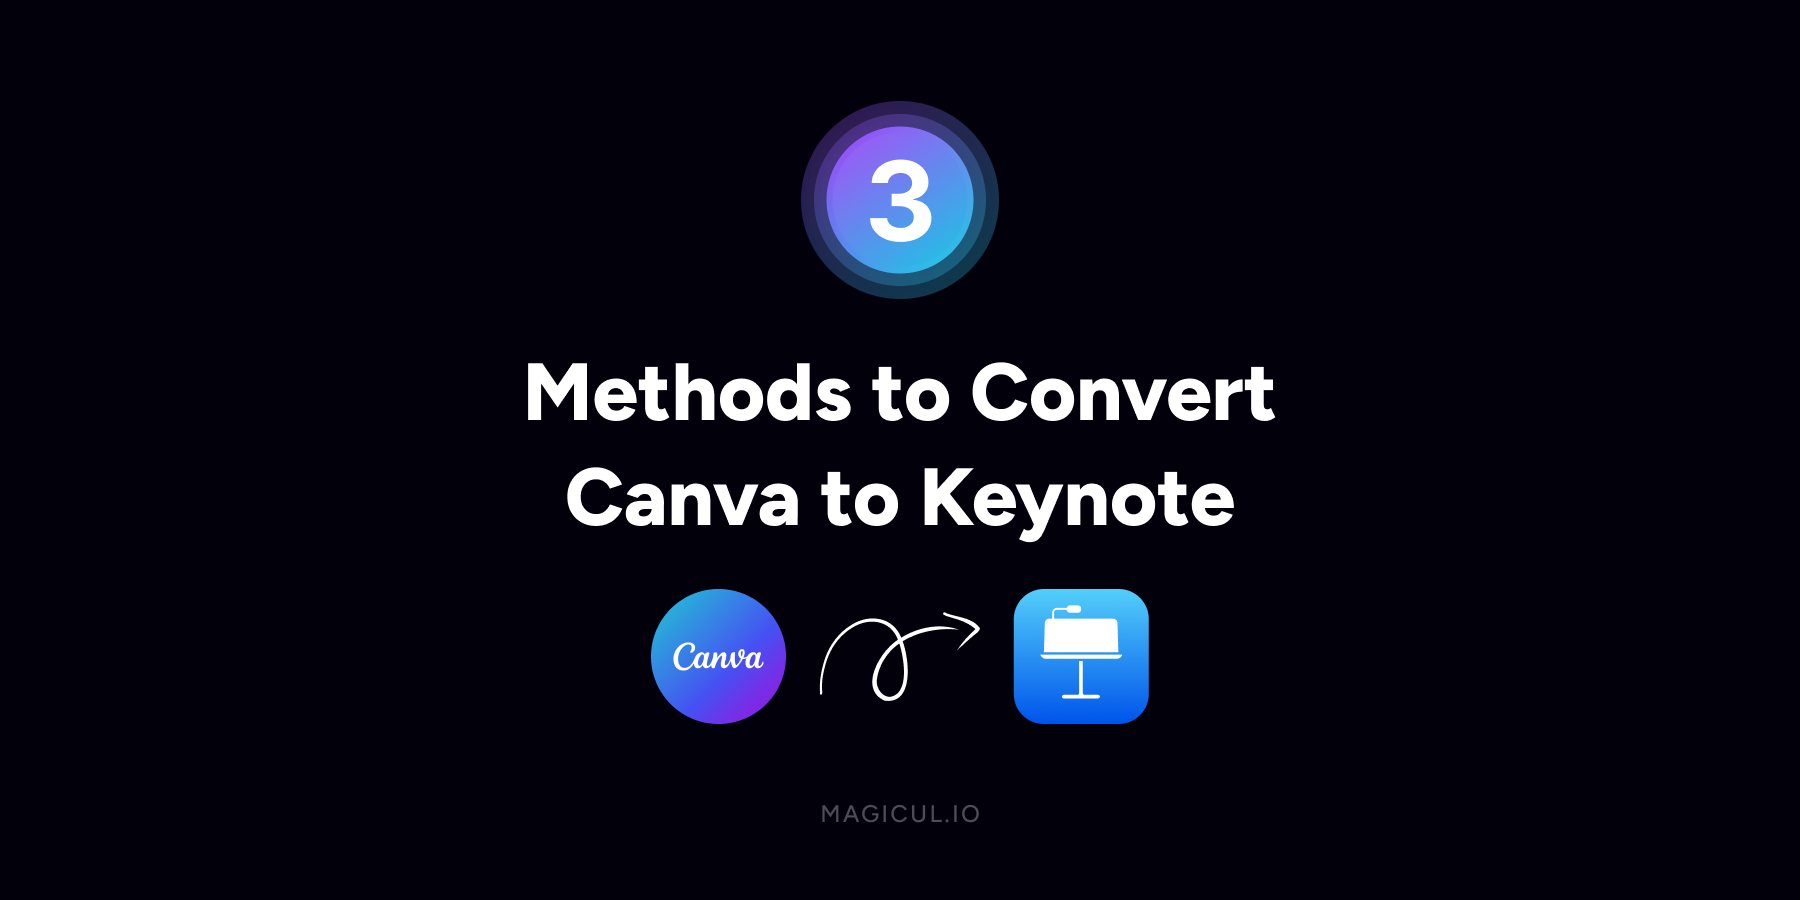 3 Methods to Convert Canva to Keynote